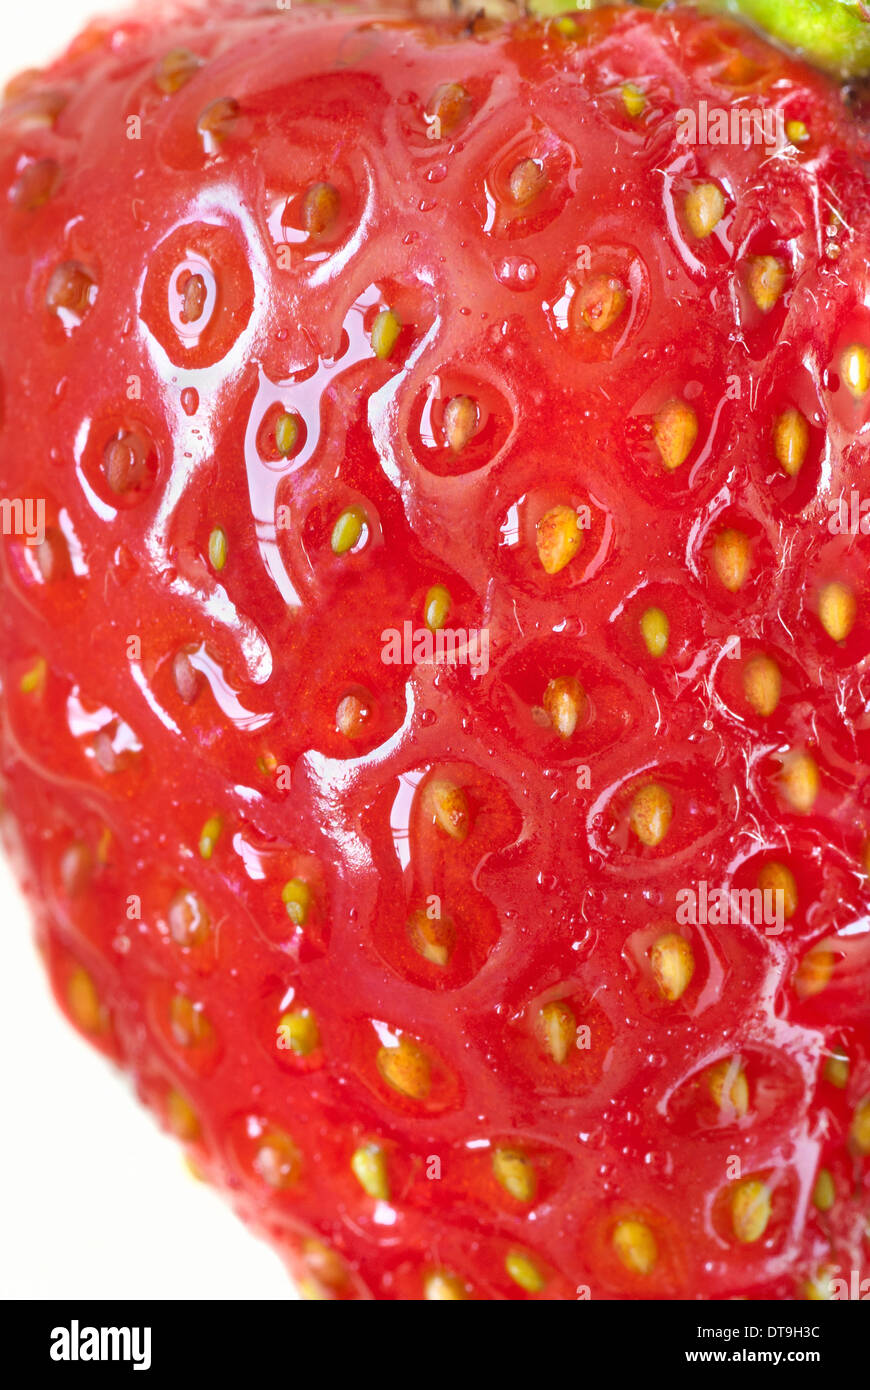 Macro of a ripe strawberry, side view. Stock Photo